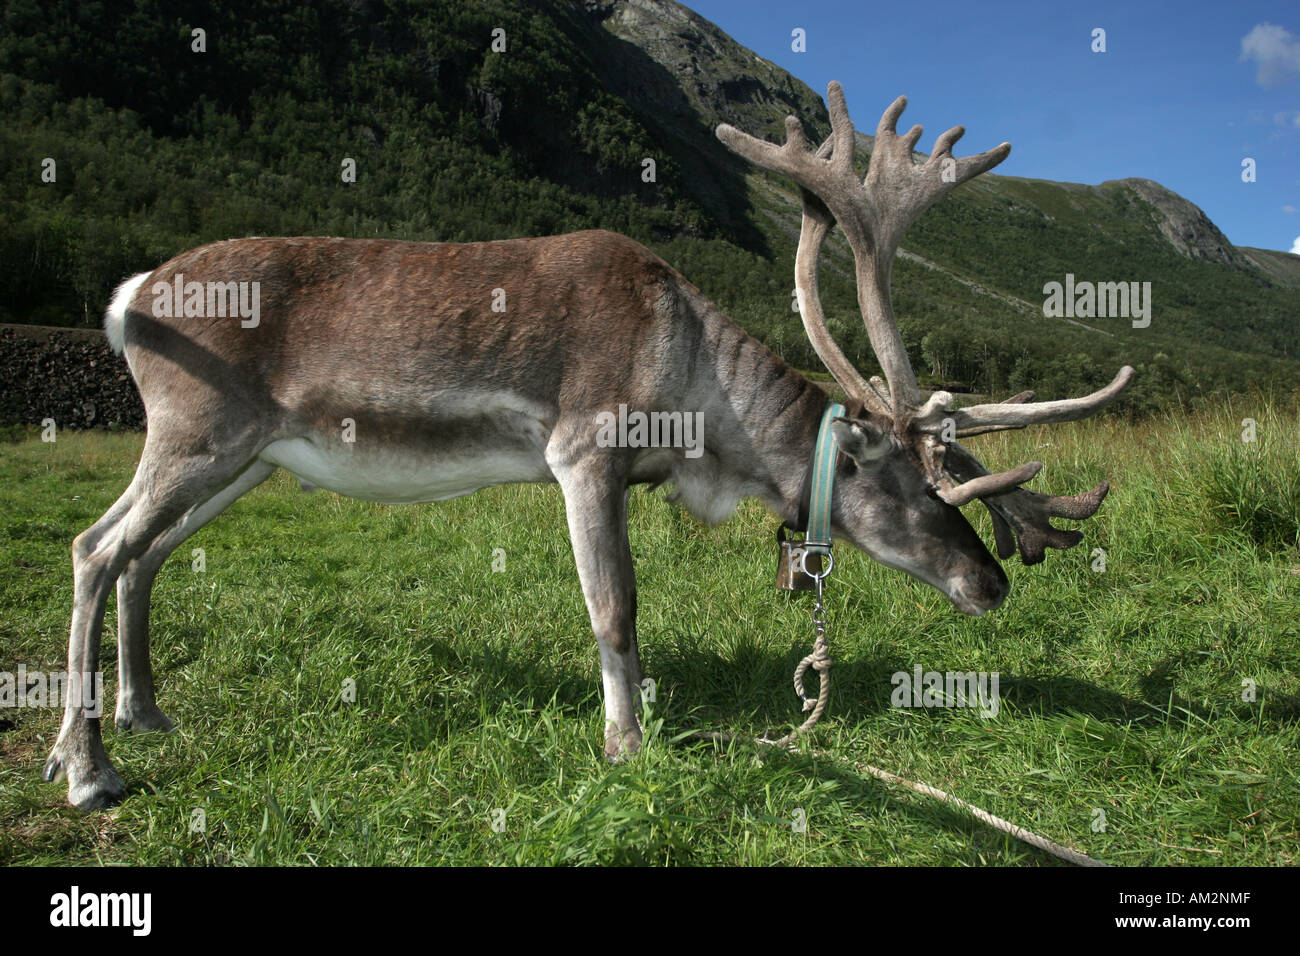 reindeer from side low view Stock Photo